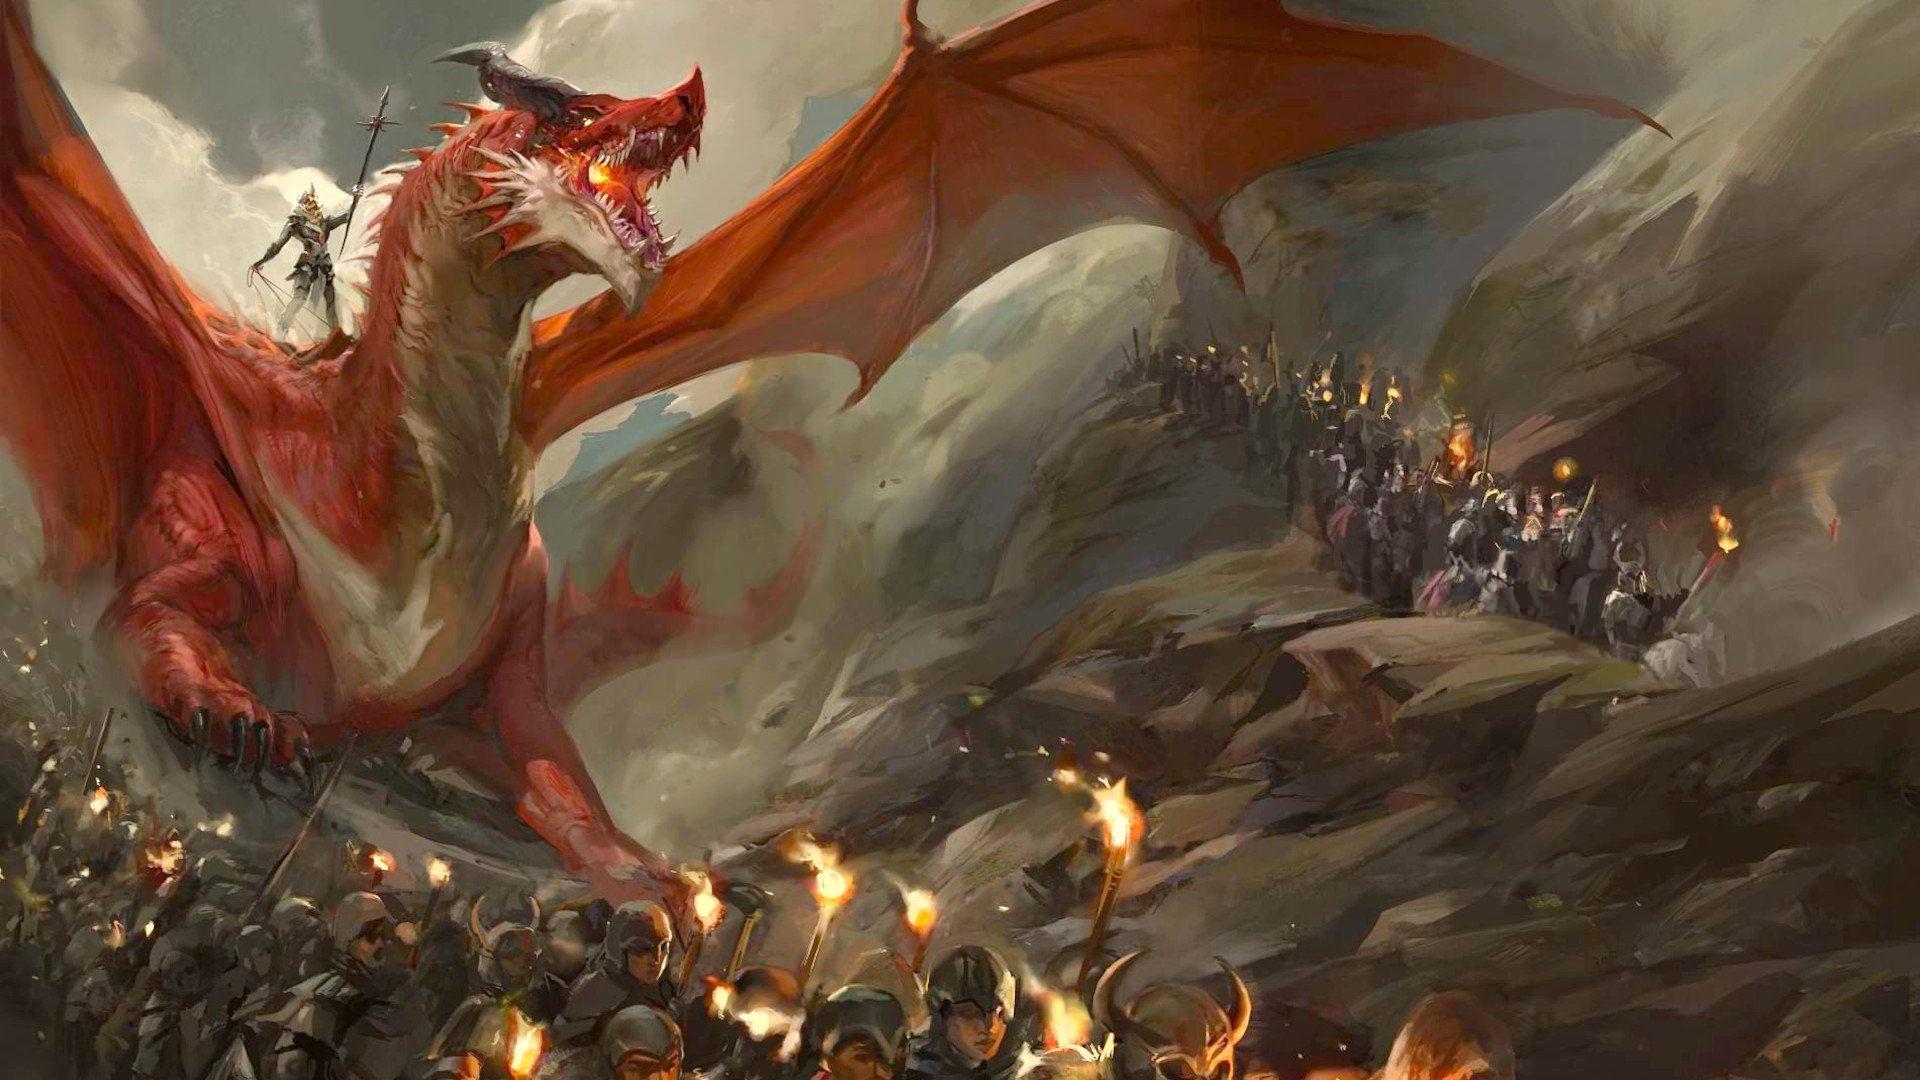 DND 6e release date and One D&D news - Wizards of the Coast artwork from Dragonlance showing a dragon and an attacking army